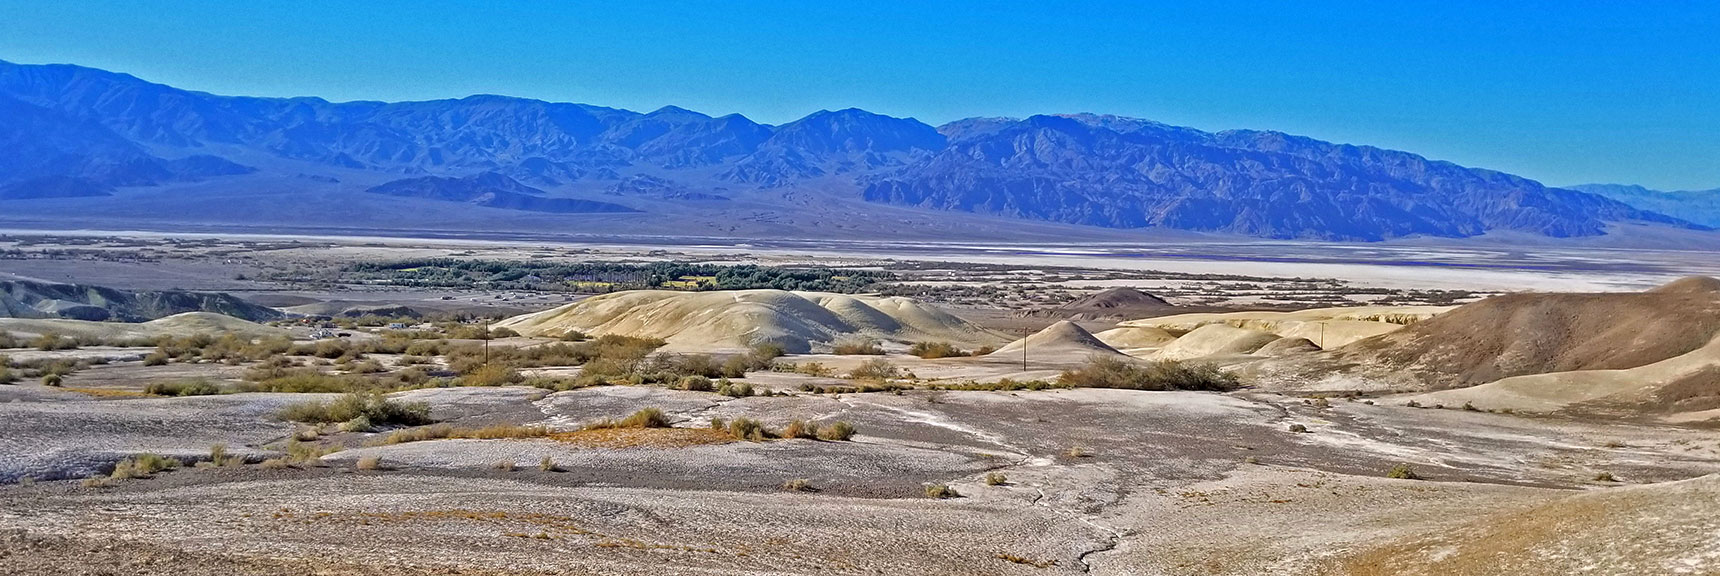 Approaching Golden Hill Triangle from Lower South Side of Table Rock. | Tea House & Table Rock Circuit | Furnace Creek | Death Valley National Park, California